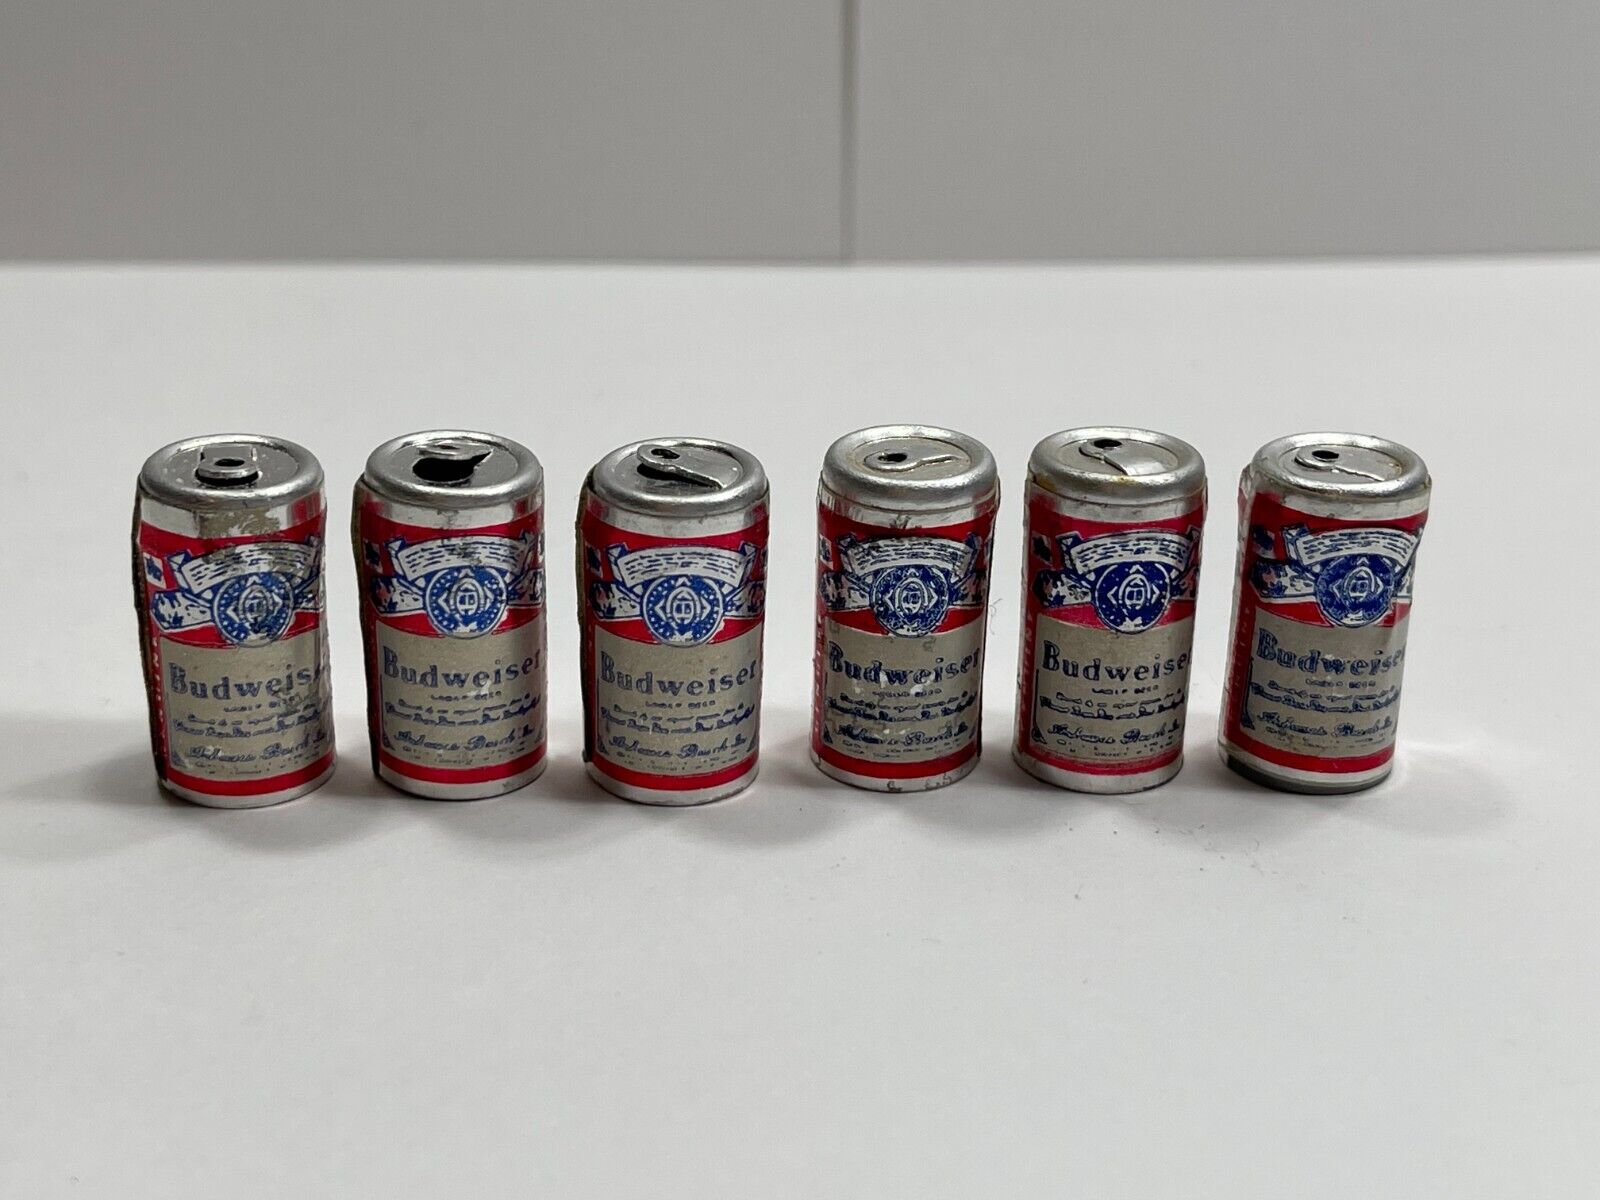 Vintage Budweiser Beer Can Lot of 6 - Miniature Barbie Doll Size *1 In*